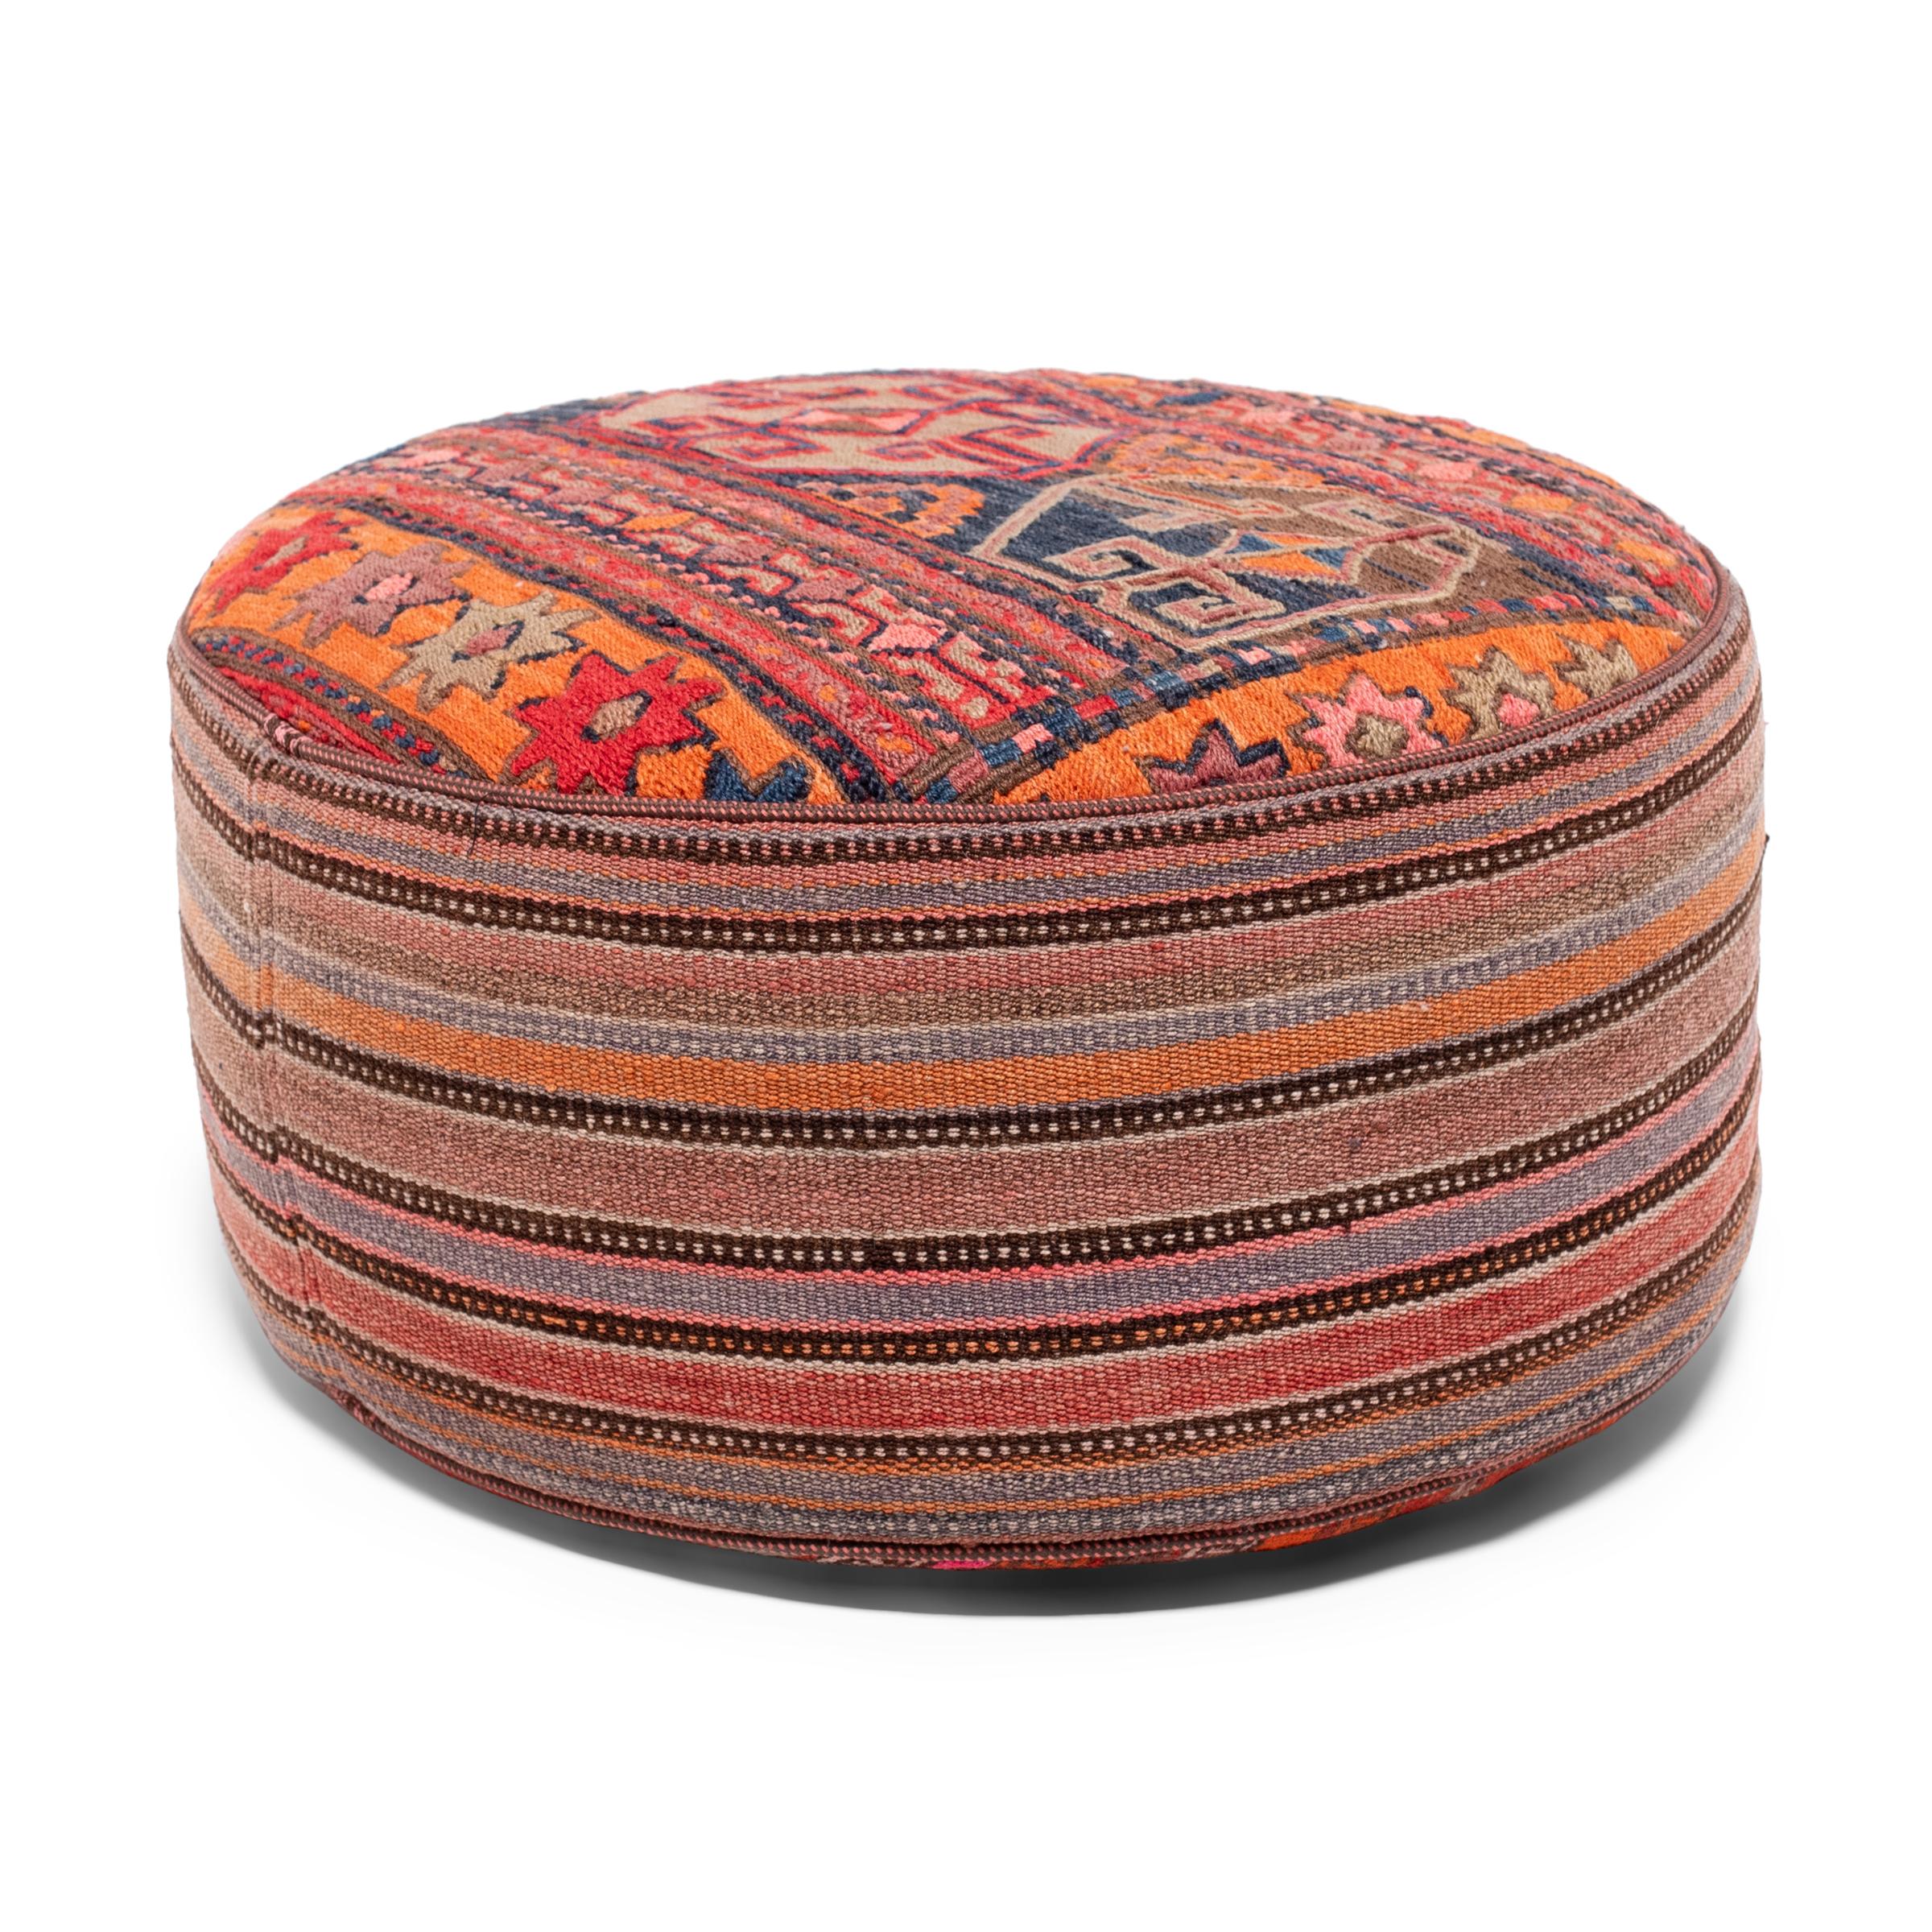 This vintage woven ottoman brightens its surroundings with the upbeat colors and patterns of Turkish kilim tapestry. The cylindrical pouf is upholstered in a colorful wool textile woven with stripes and traditional geometric motifs in a palette of